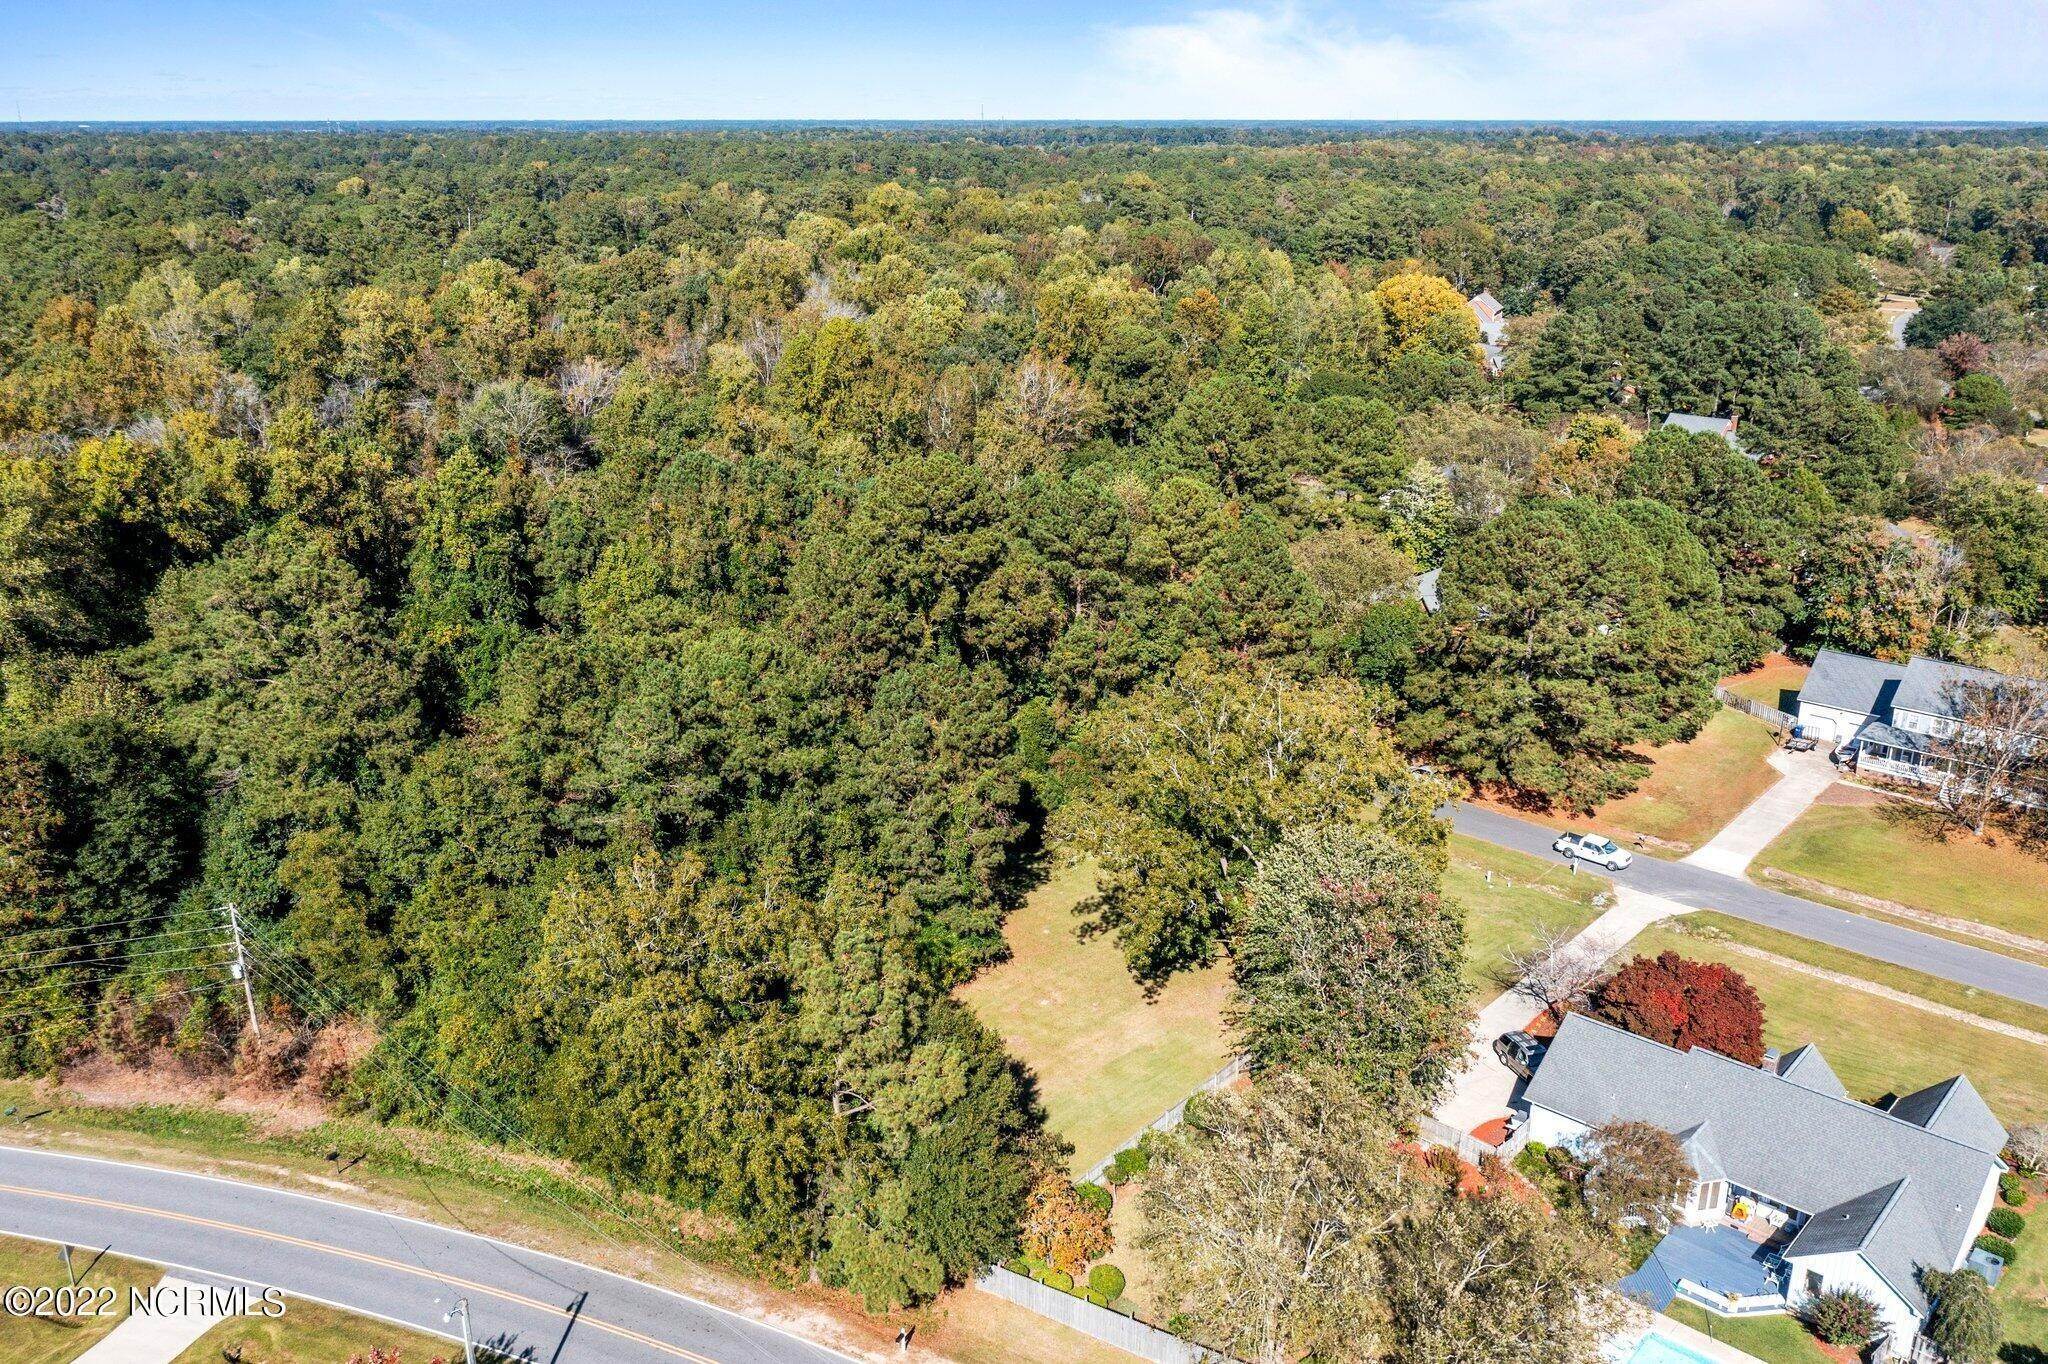 9. Land for Sale at Greenville, NC 27858